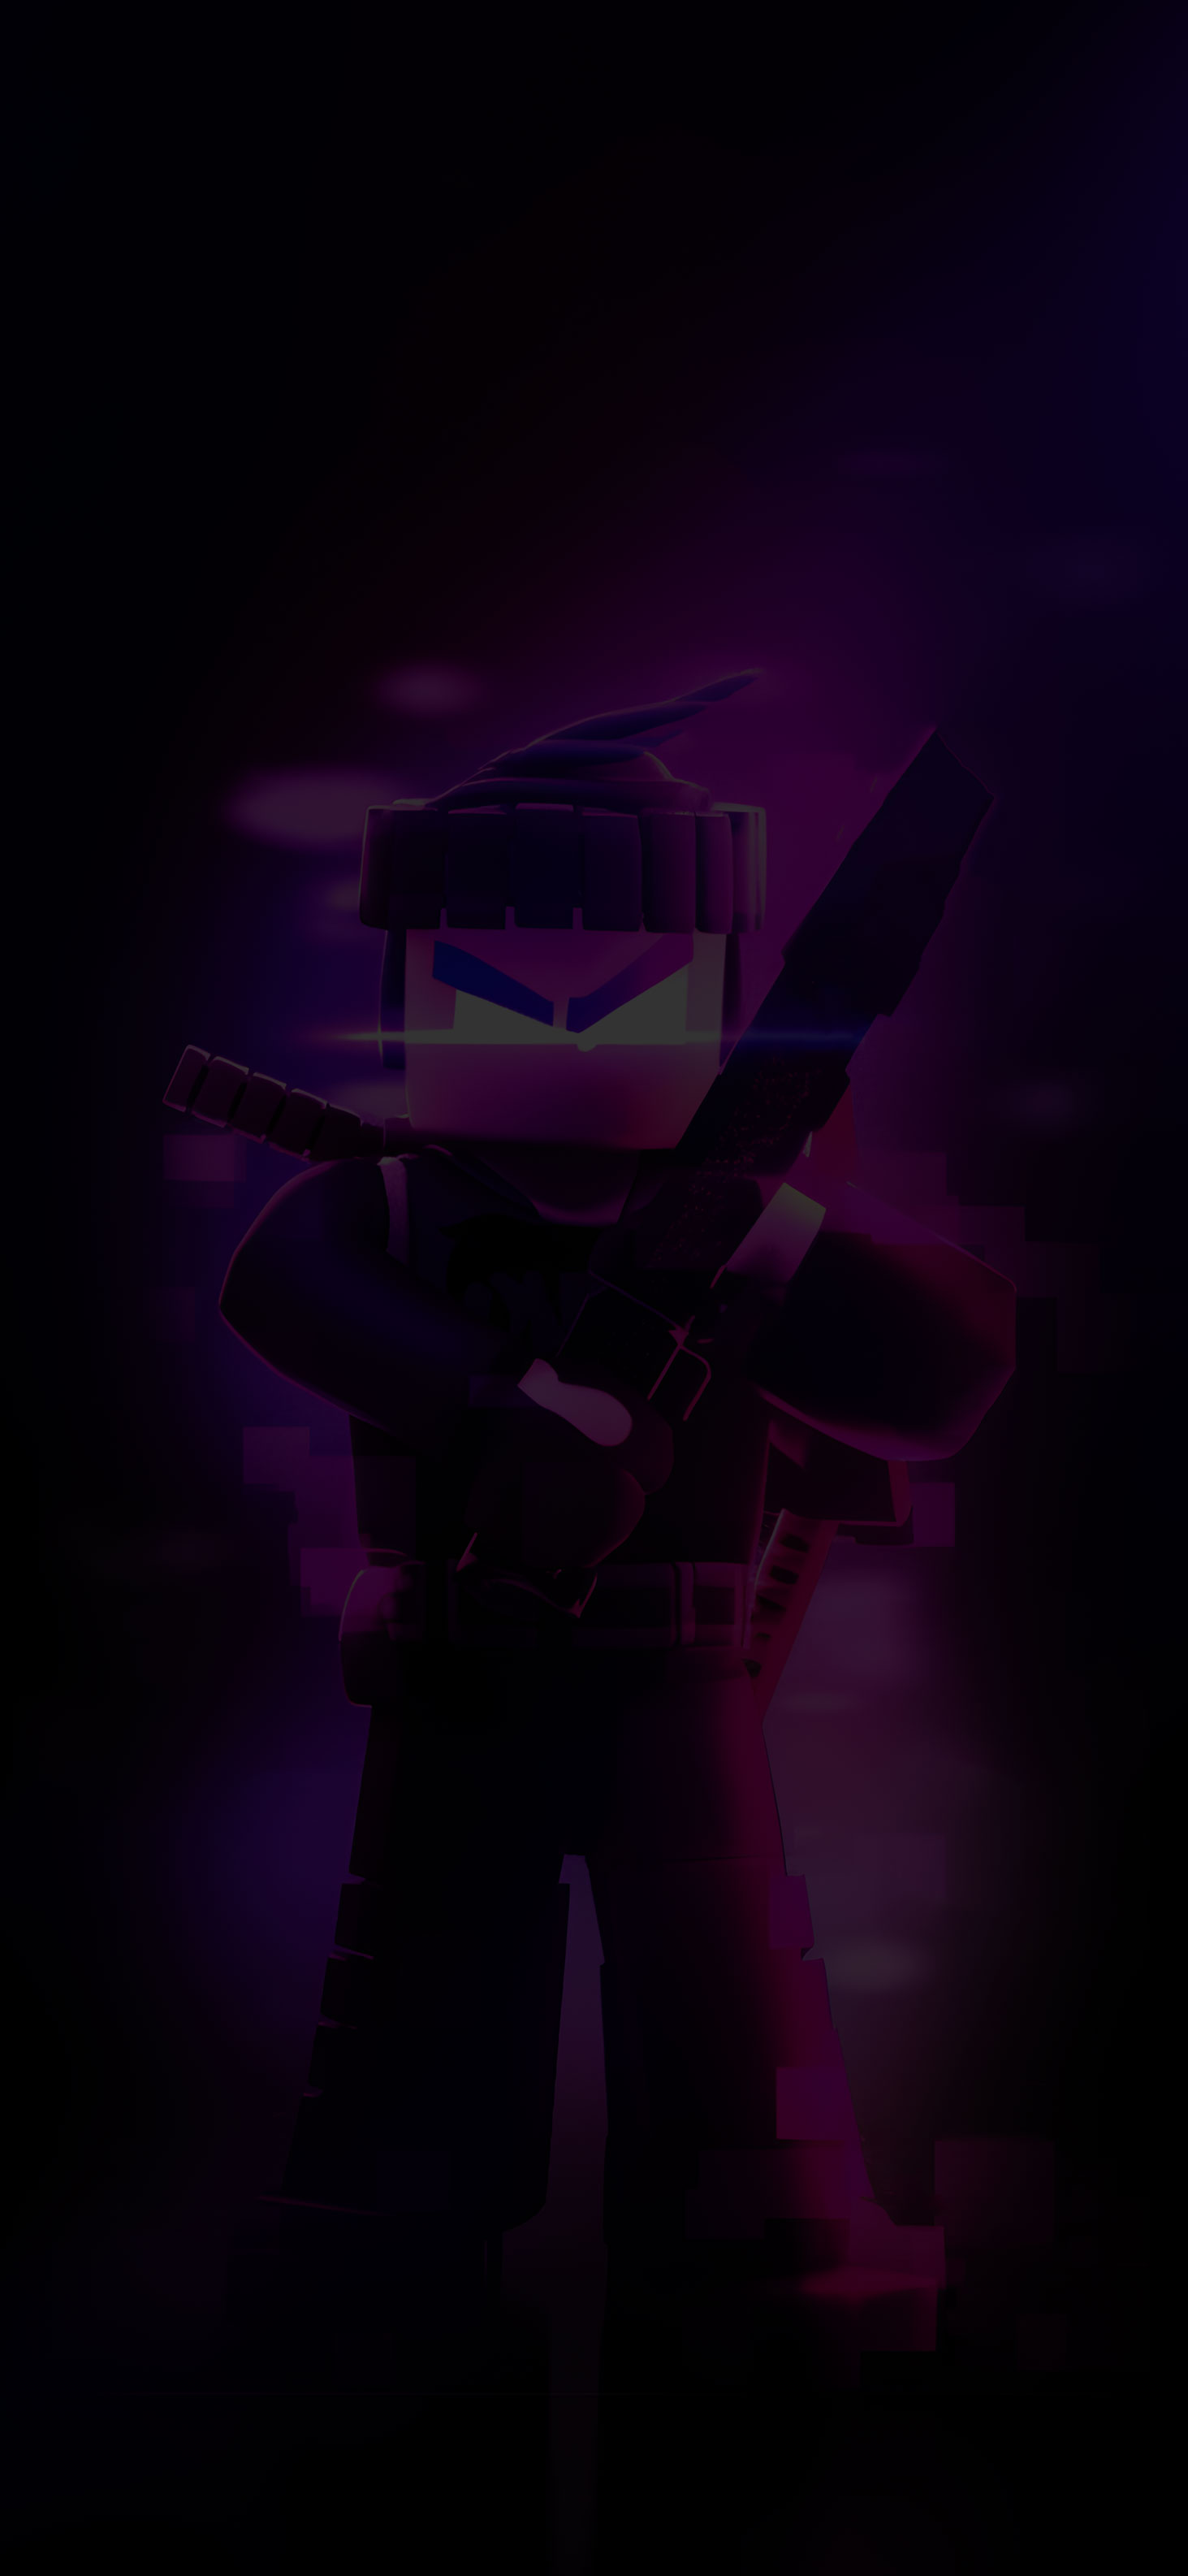 Minecraft And Roblox Wallpaper Download